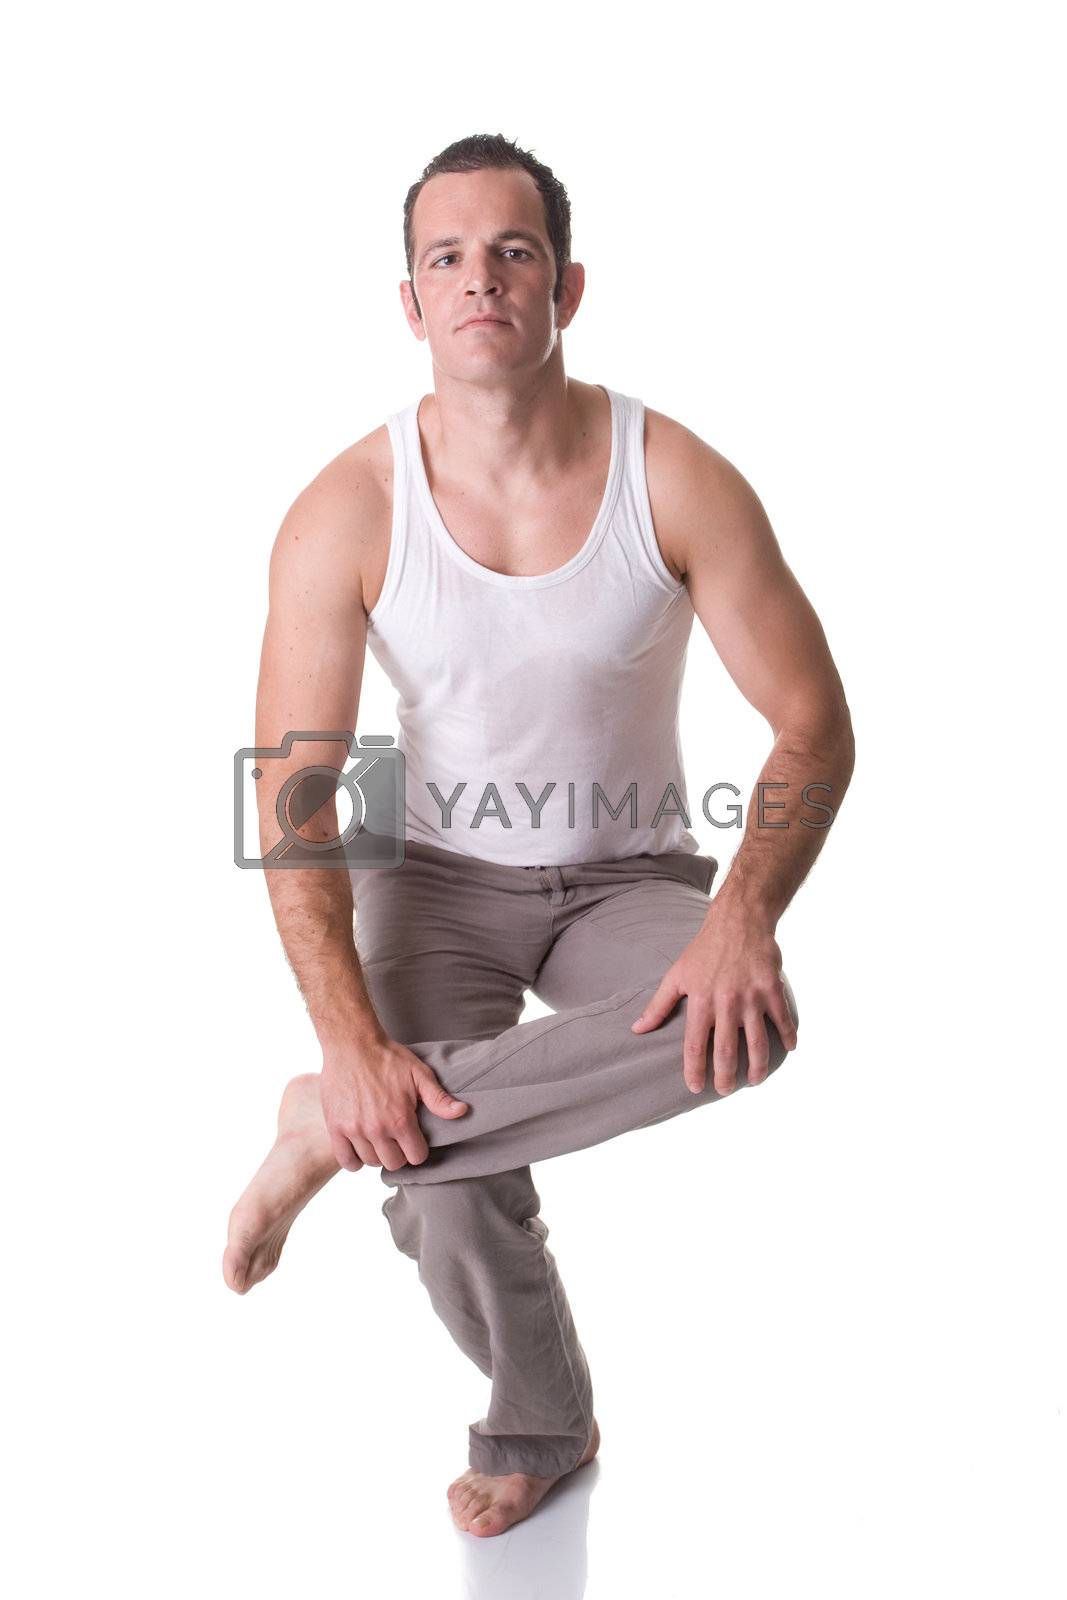 Royalty free image of Stretching Excercise by ajn